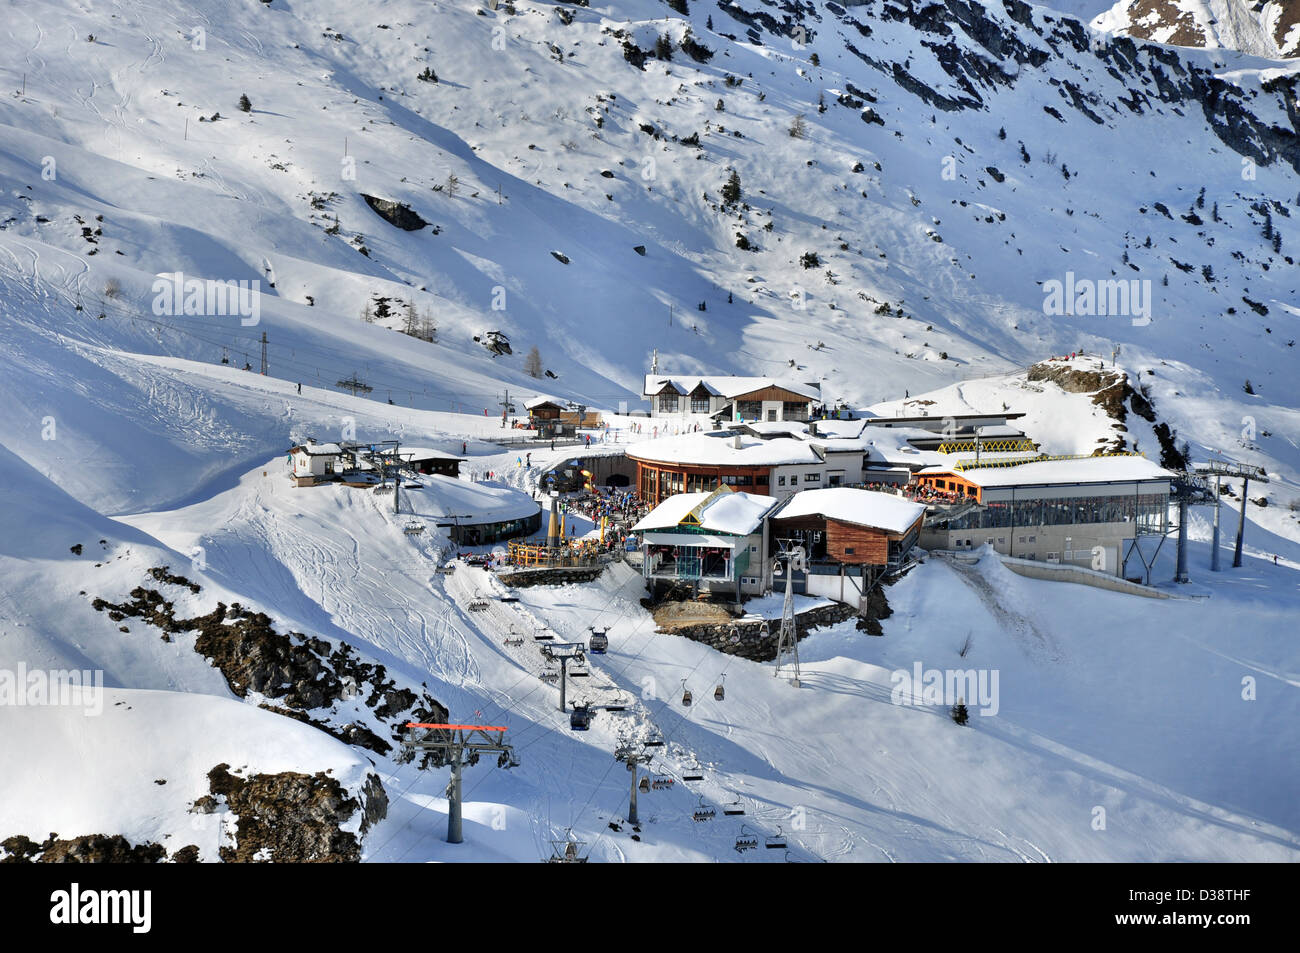 Ski center at Hintertux Glacier in Zillertal Alps in Austria, with a cable  car station, restaurant, bar and ski lifts Stock Photo - Alamy